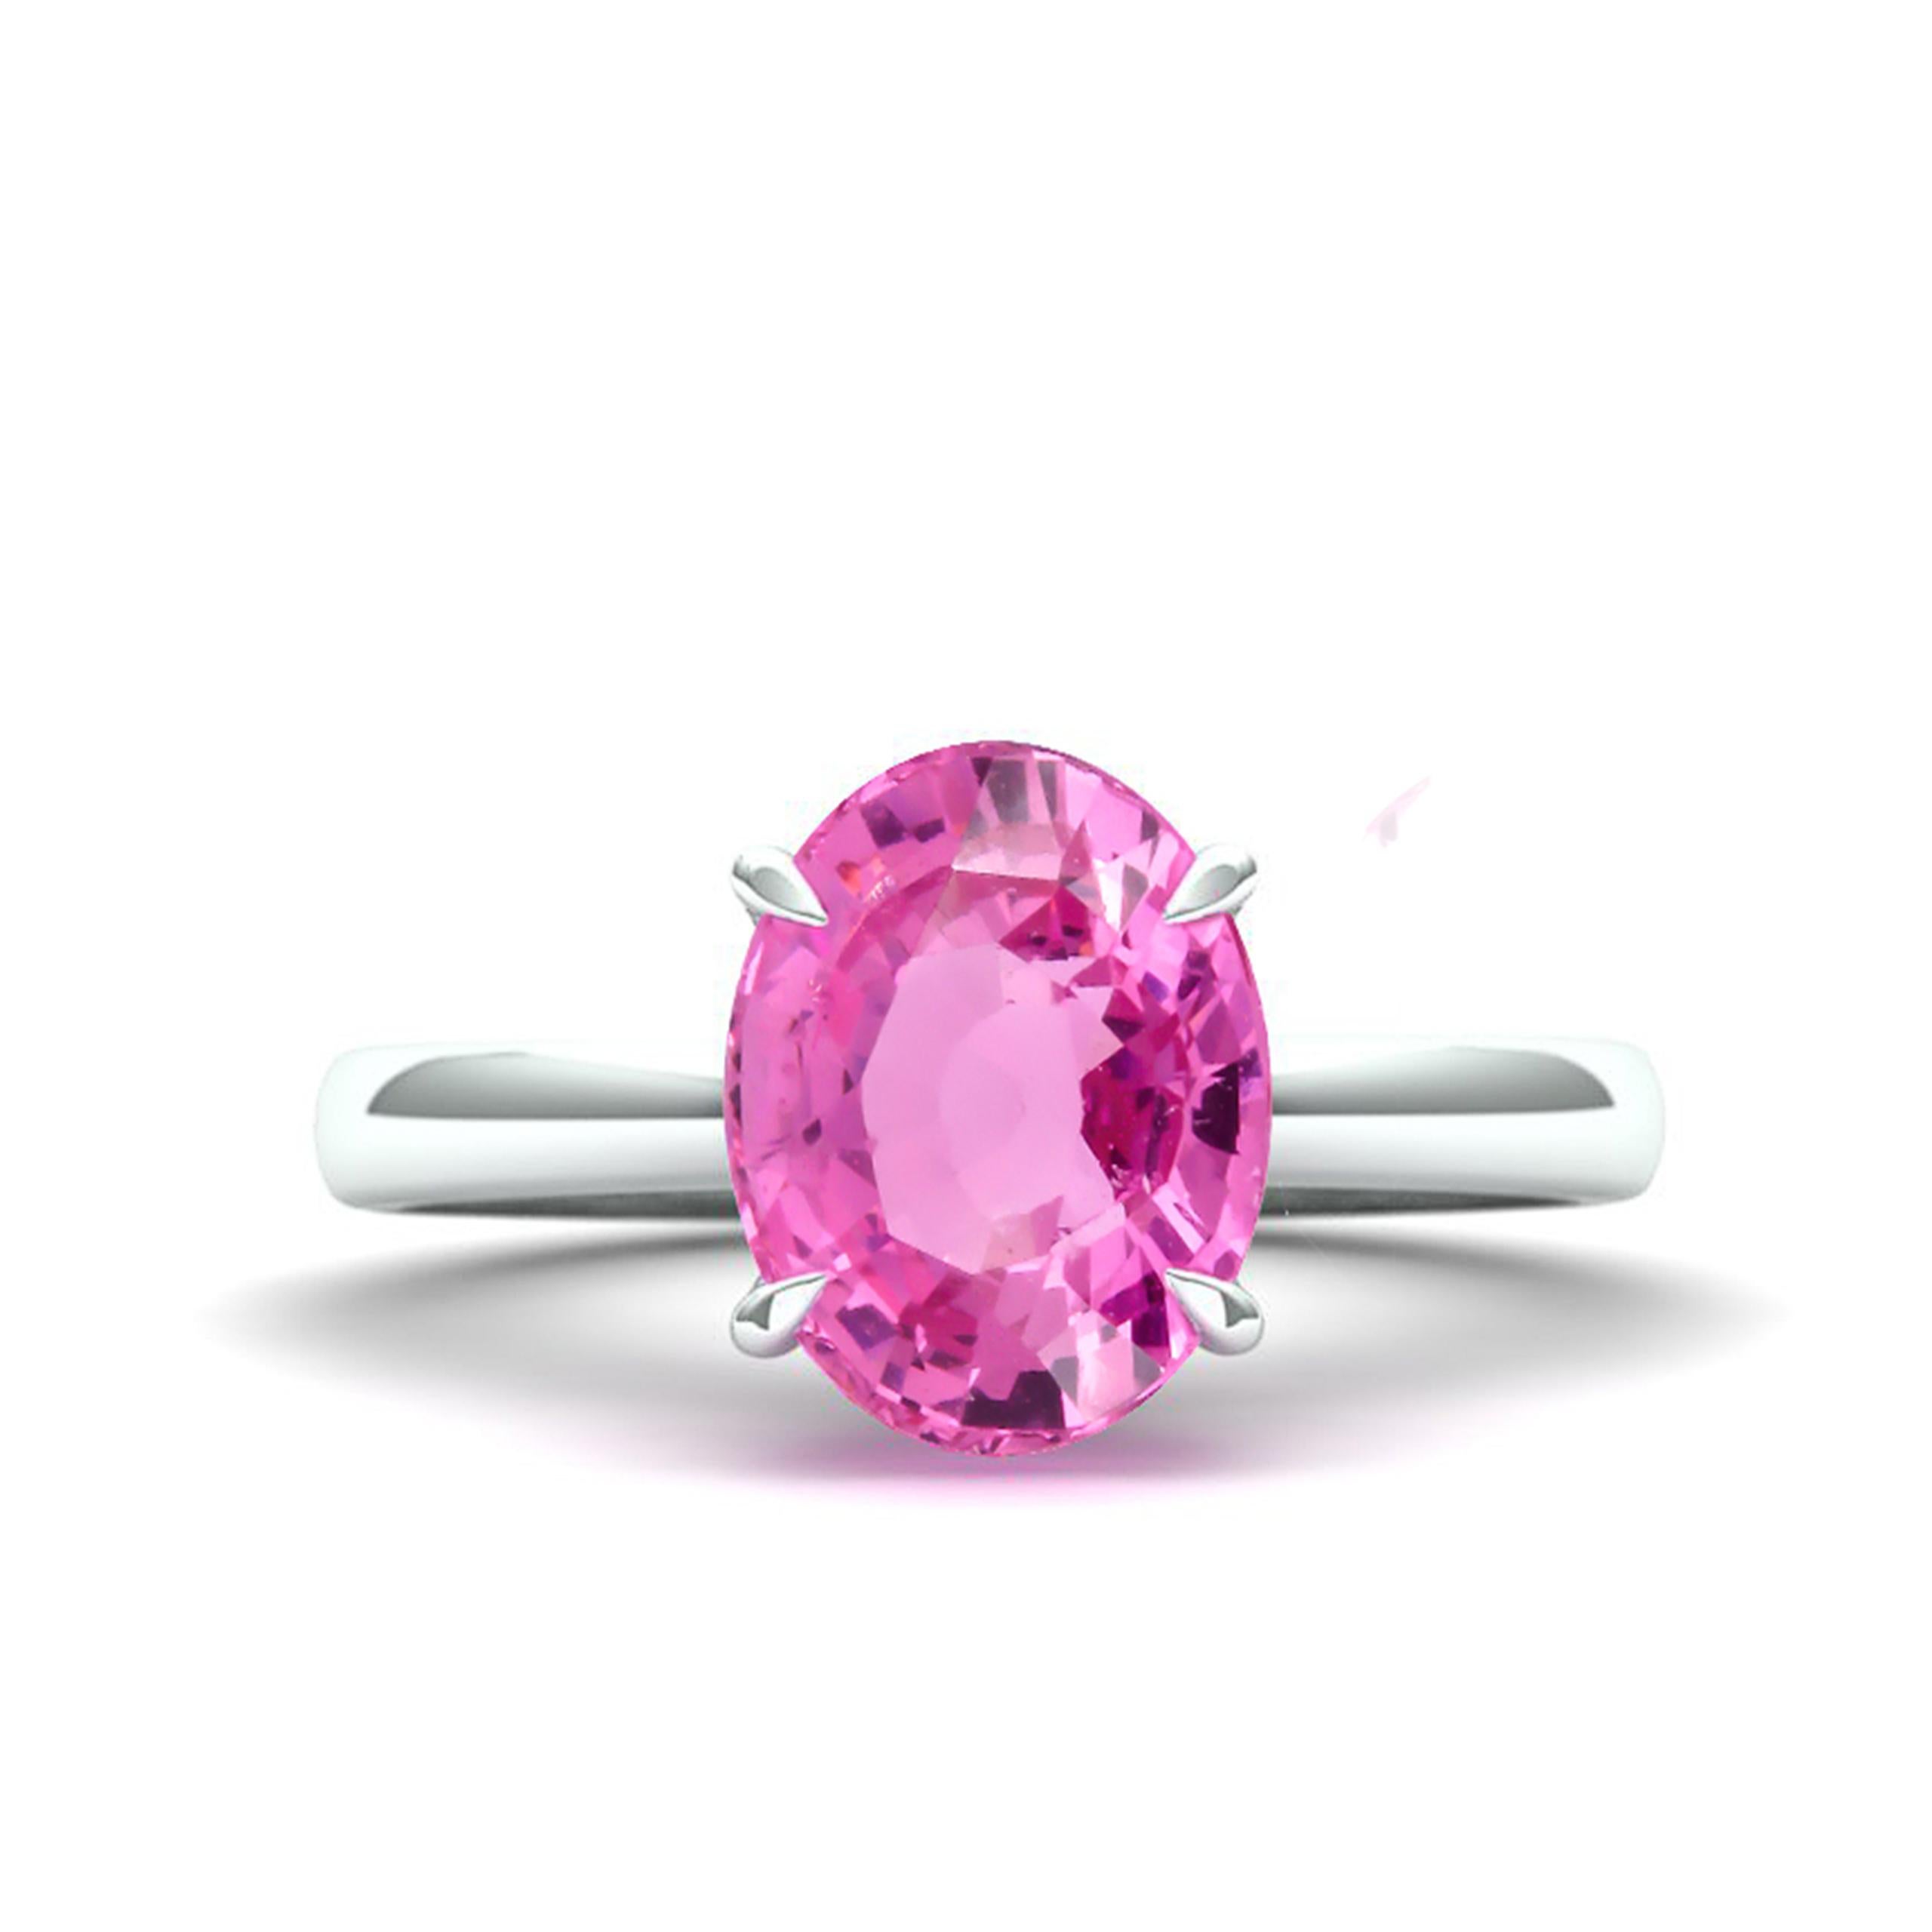 Enchant with our Natural Spinel ring featuring a 1.54-carat natural untreated Spinel in a vivid pink hue. Set in a classic 4-prong solitaire setting.

Certified by Emteem Gem Labs, it's available in your choice of 18K yellow gold, white gold, or